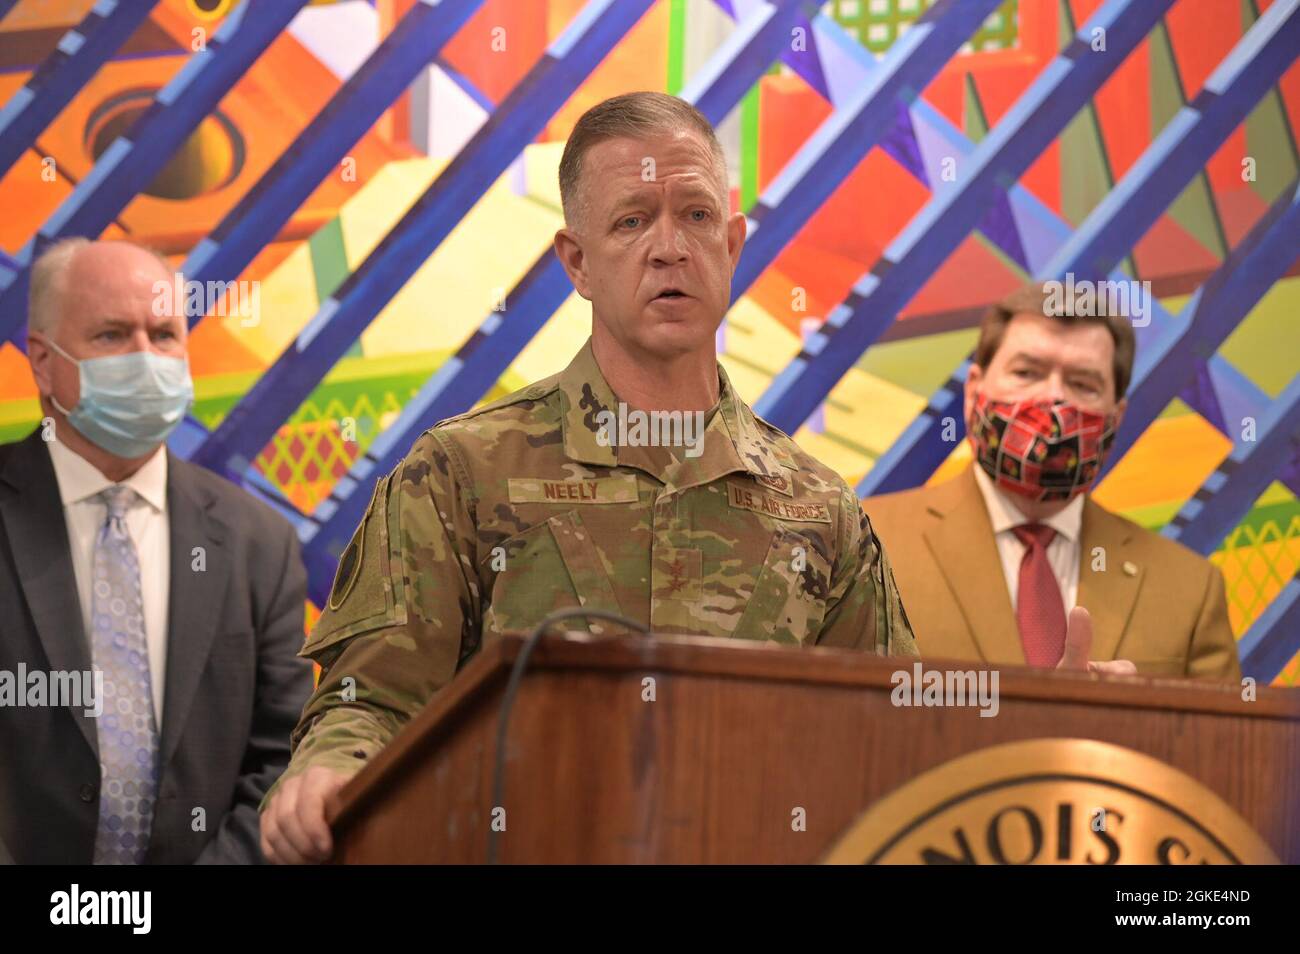 U.S. Air Force Maj. Gen. Rich Neely, The Adjutant General of Illinois and the Commander of the Illinois National Guard speaks during press conference held on the Illinois State University, Normal, Illinois, March 25, 2021. Maj. Gen. Neely often speaks to media to communicate to the public about Illinois National Guard operations in relation to COVID-19 relief efforts. Stock Photo